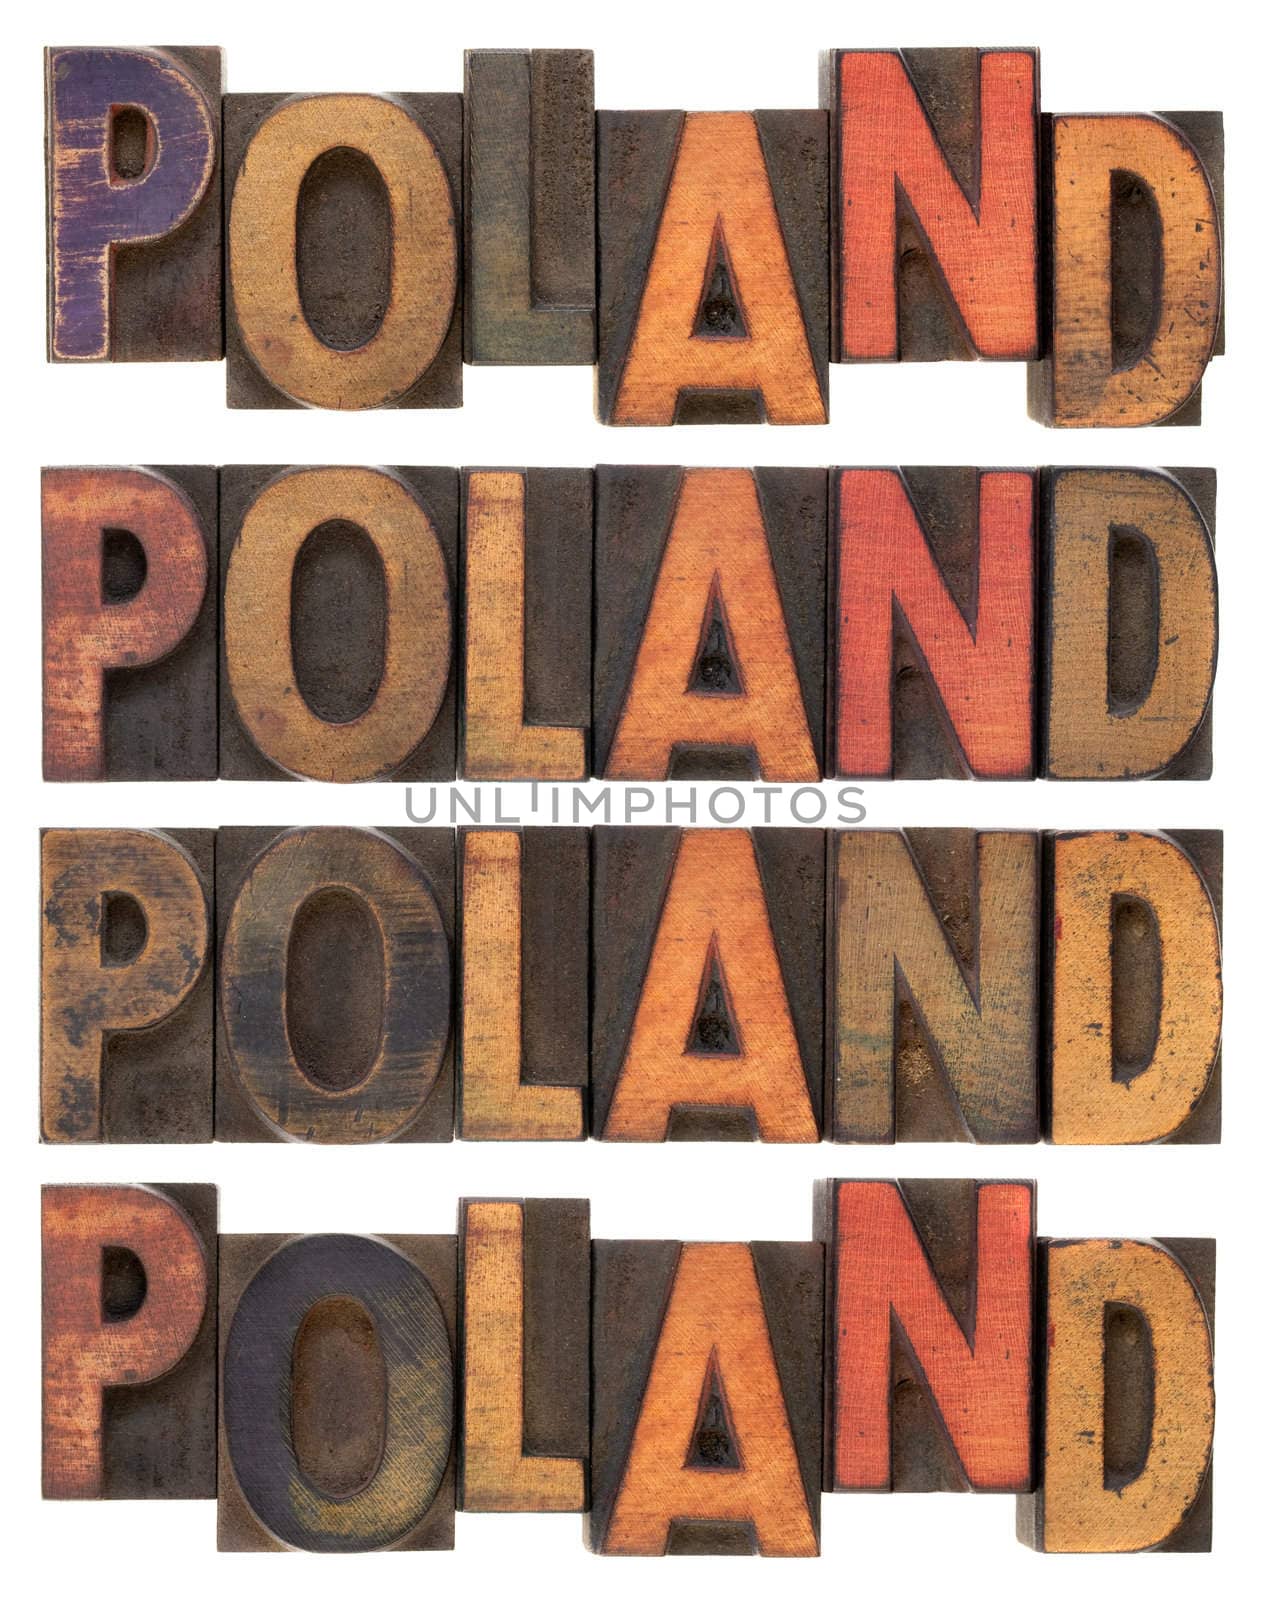 word Poland (four versions) in vintage letterpress wood type, stained by ink, isolated on white